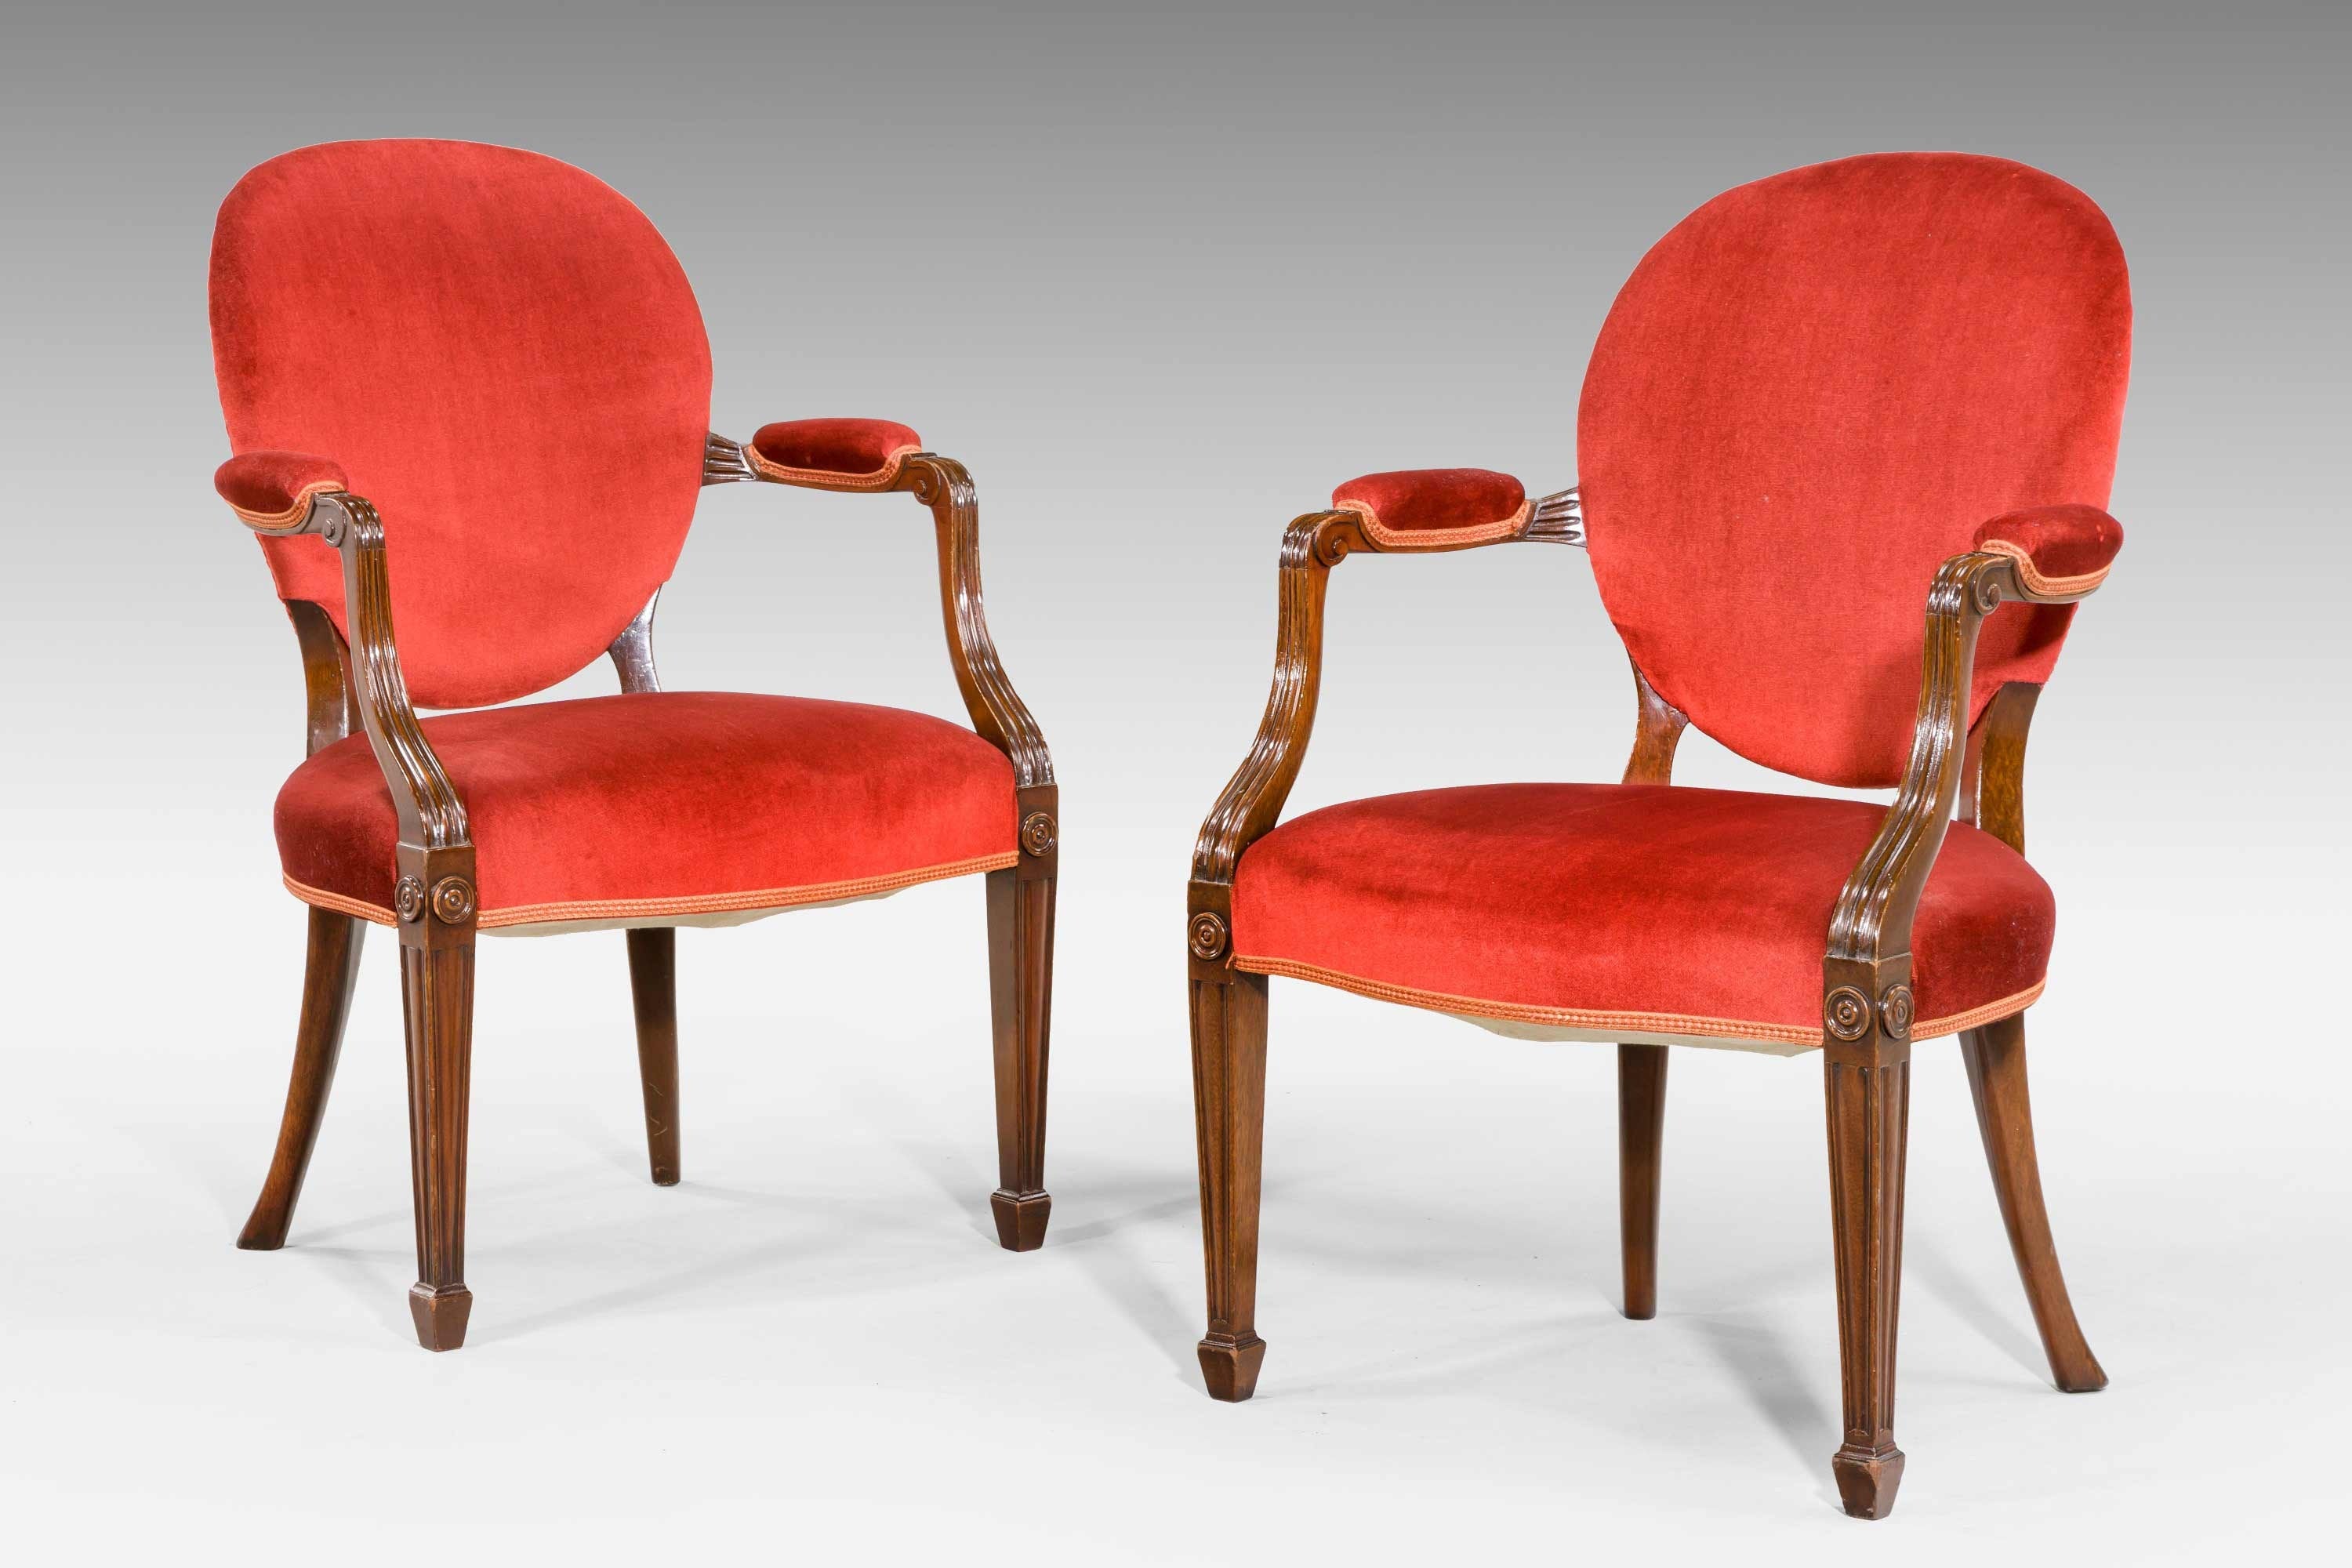 Pair of George III Design Elbow Chairs